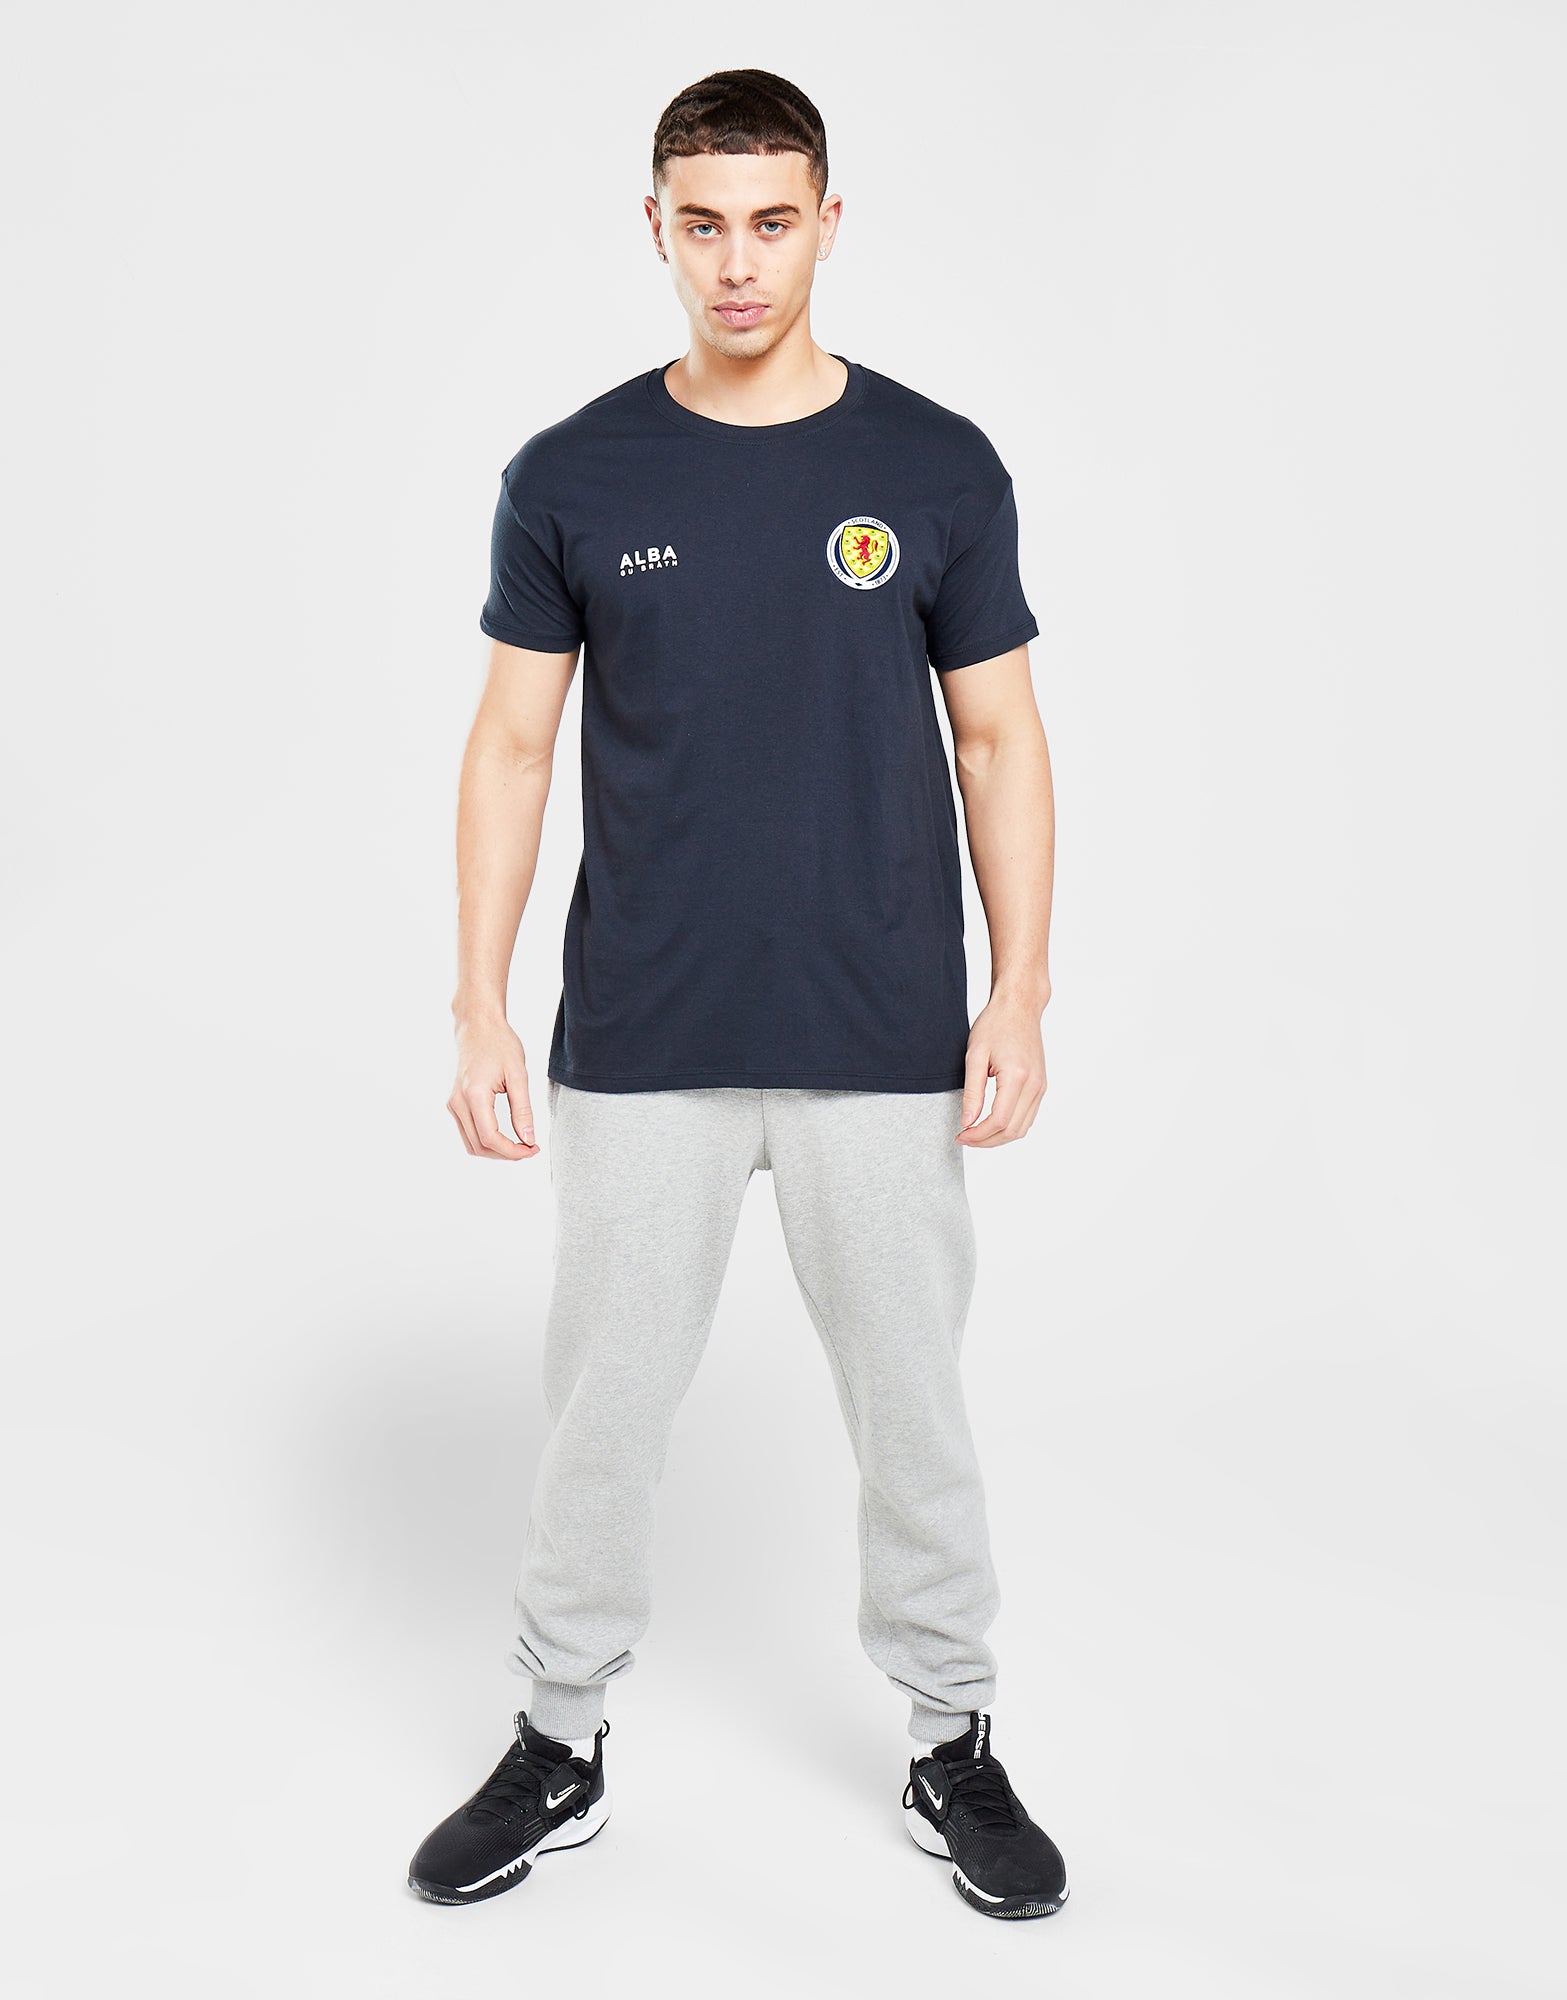 Official Team Scotland Flag and Badge T-Shirt - Navy - The World Football Store